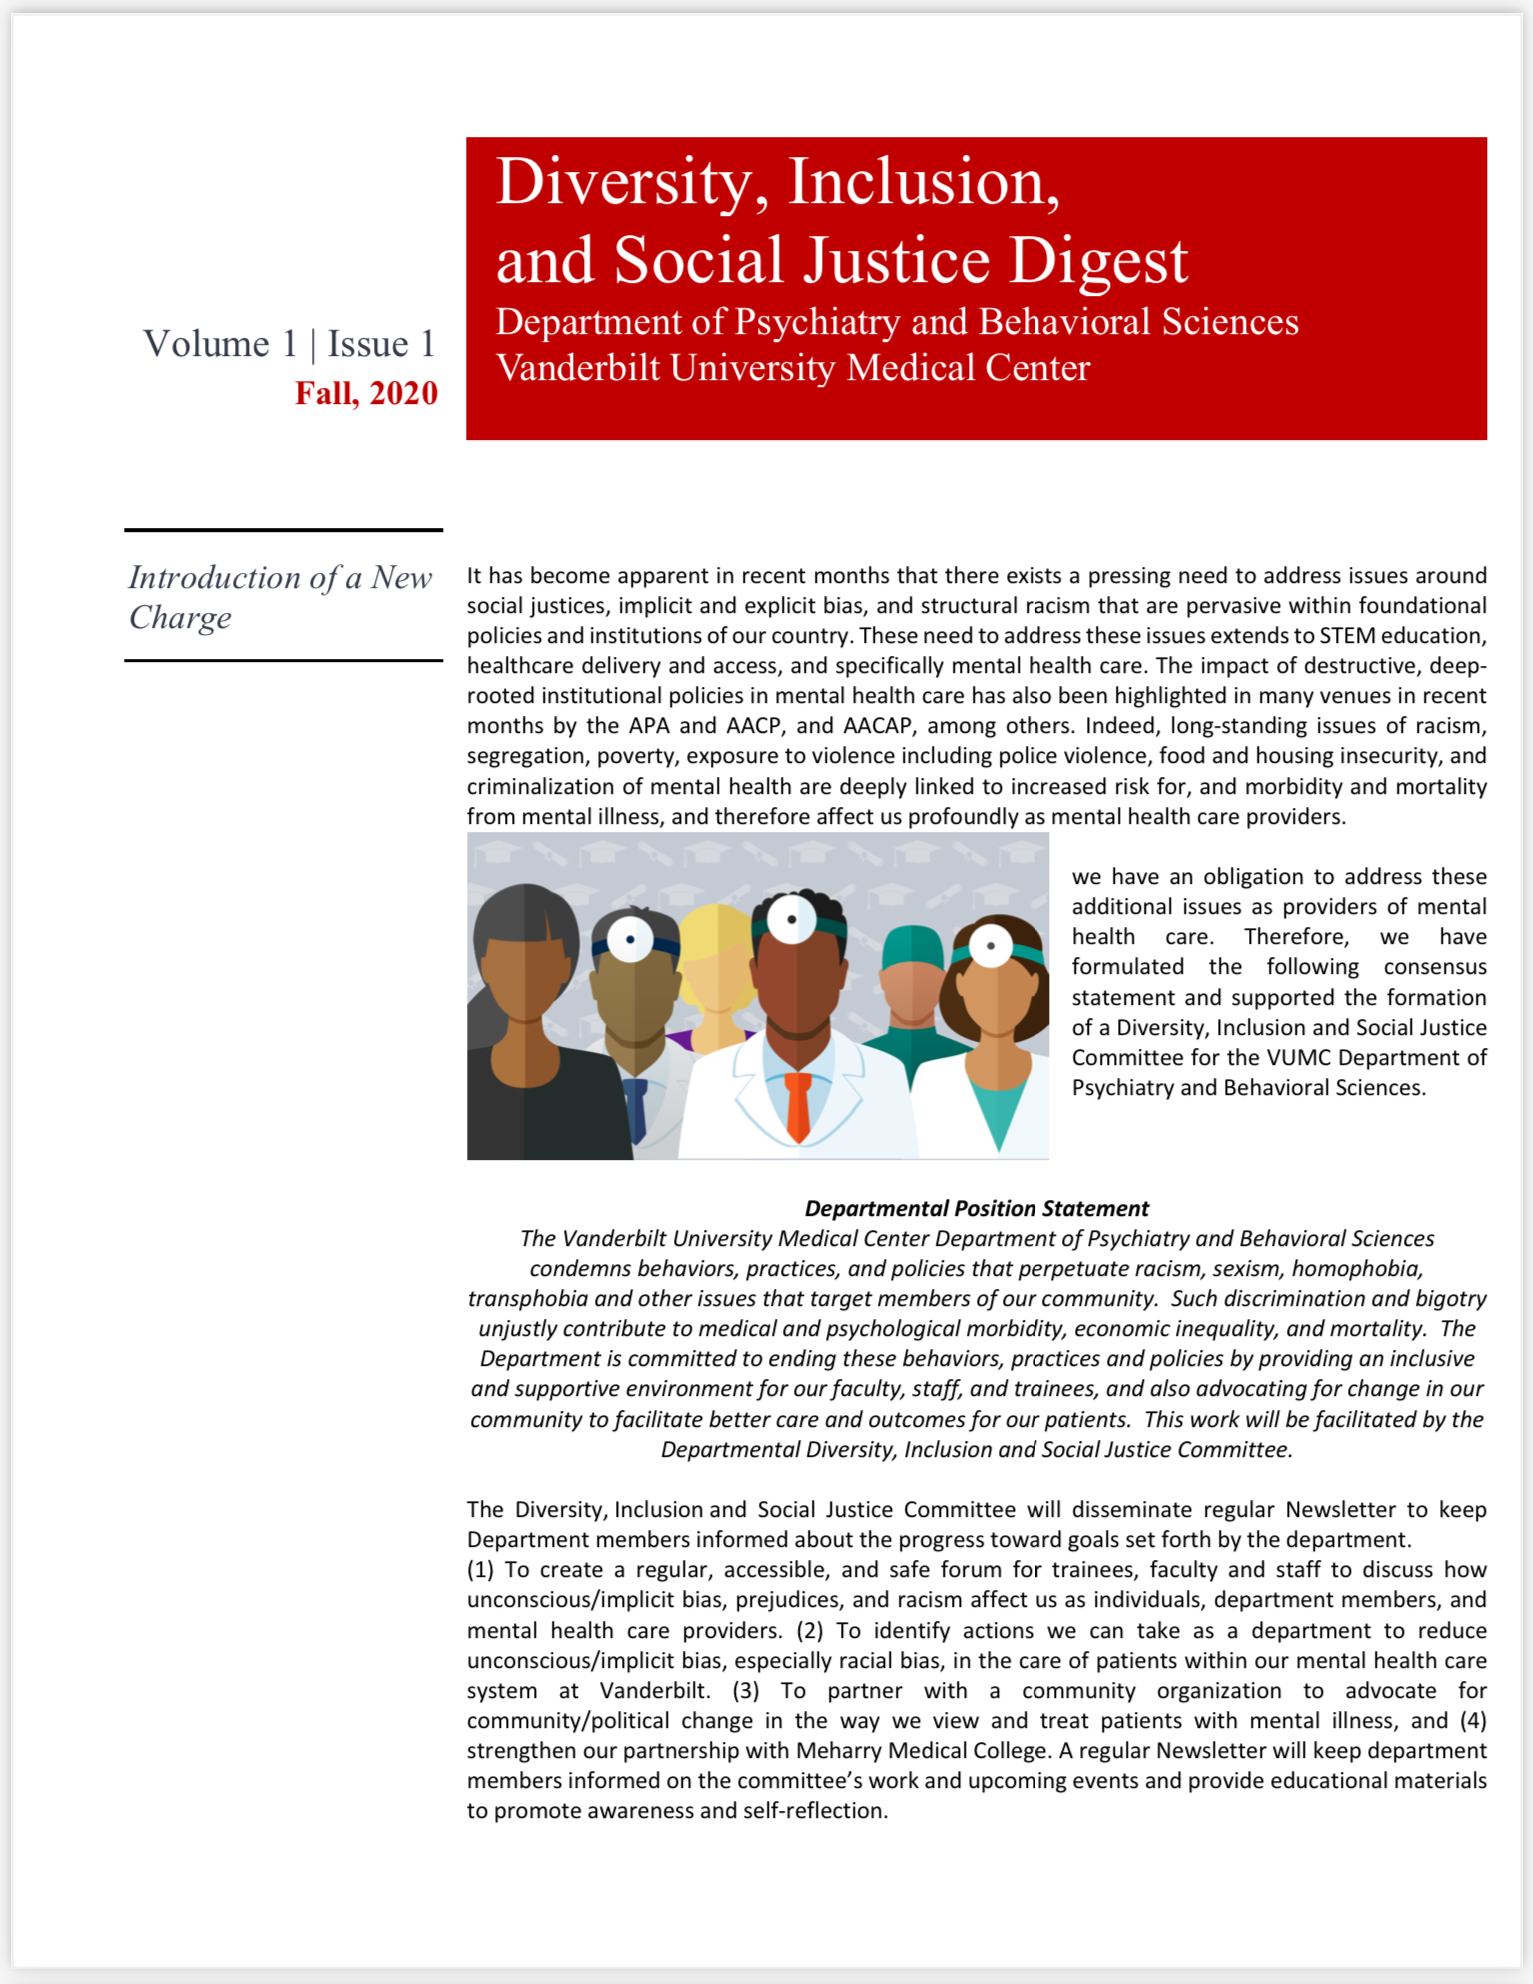 Diversity, Inclusion, and Social Justice Newsletter